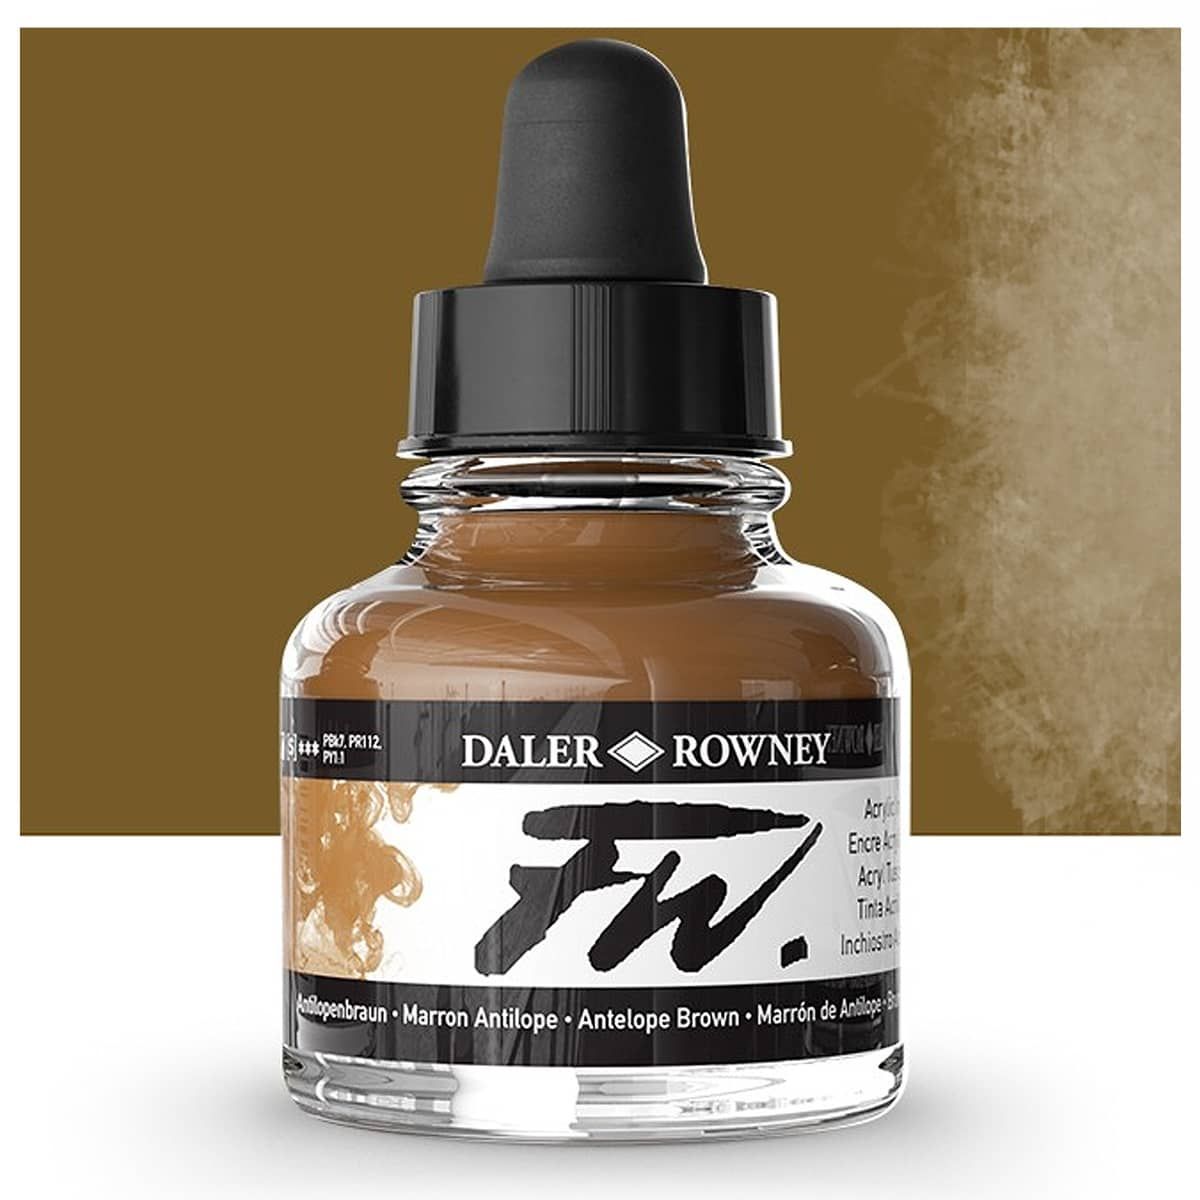  Daler-Rowney FW Acrylic Ink Bottle 3-Color Starter Set with  Empty Marker - Acrylic Set of Drawing Inks for Artists and Students - Art  Ink Calligraphy Set - Permanent Calligraphy Ink